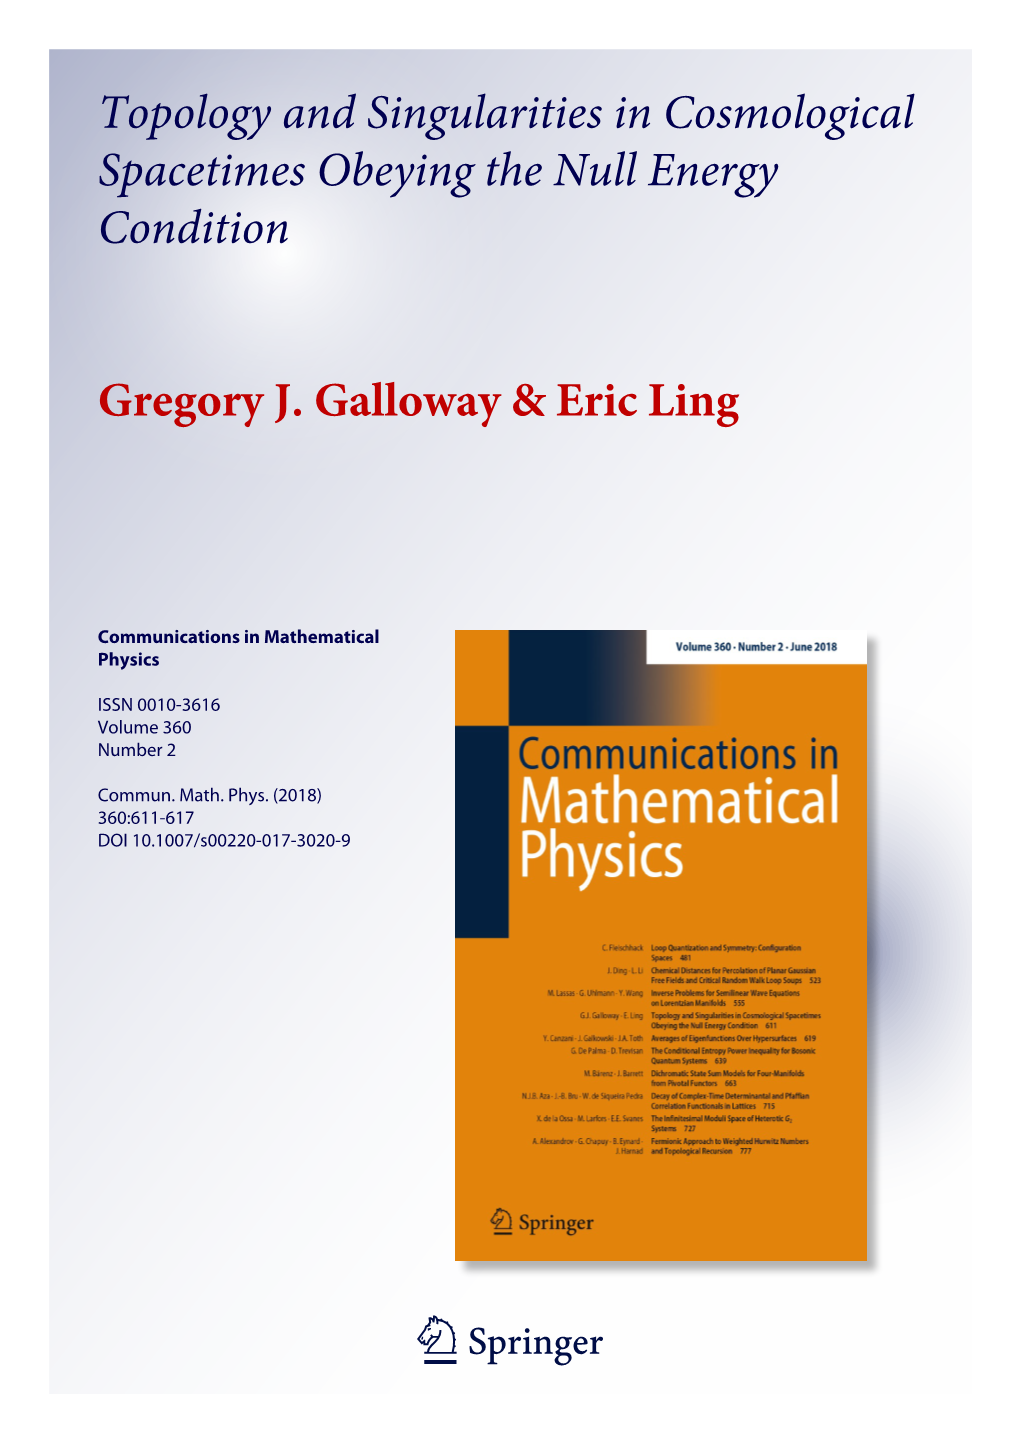 Topology and Singularities in Cosmological Spacetimes Obeying the Null Energy Condition